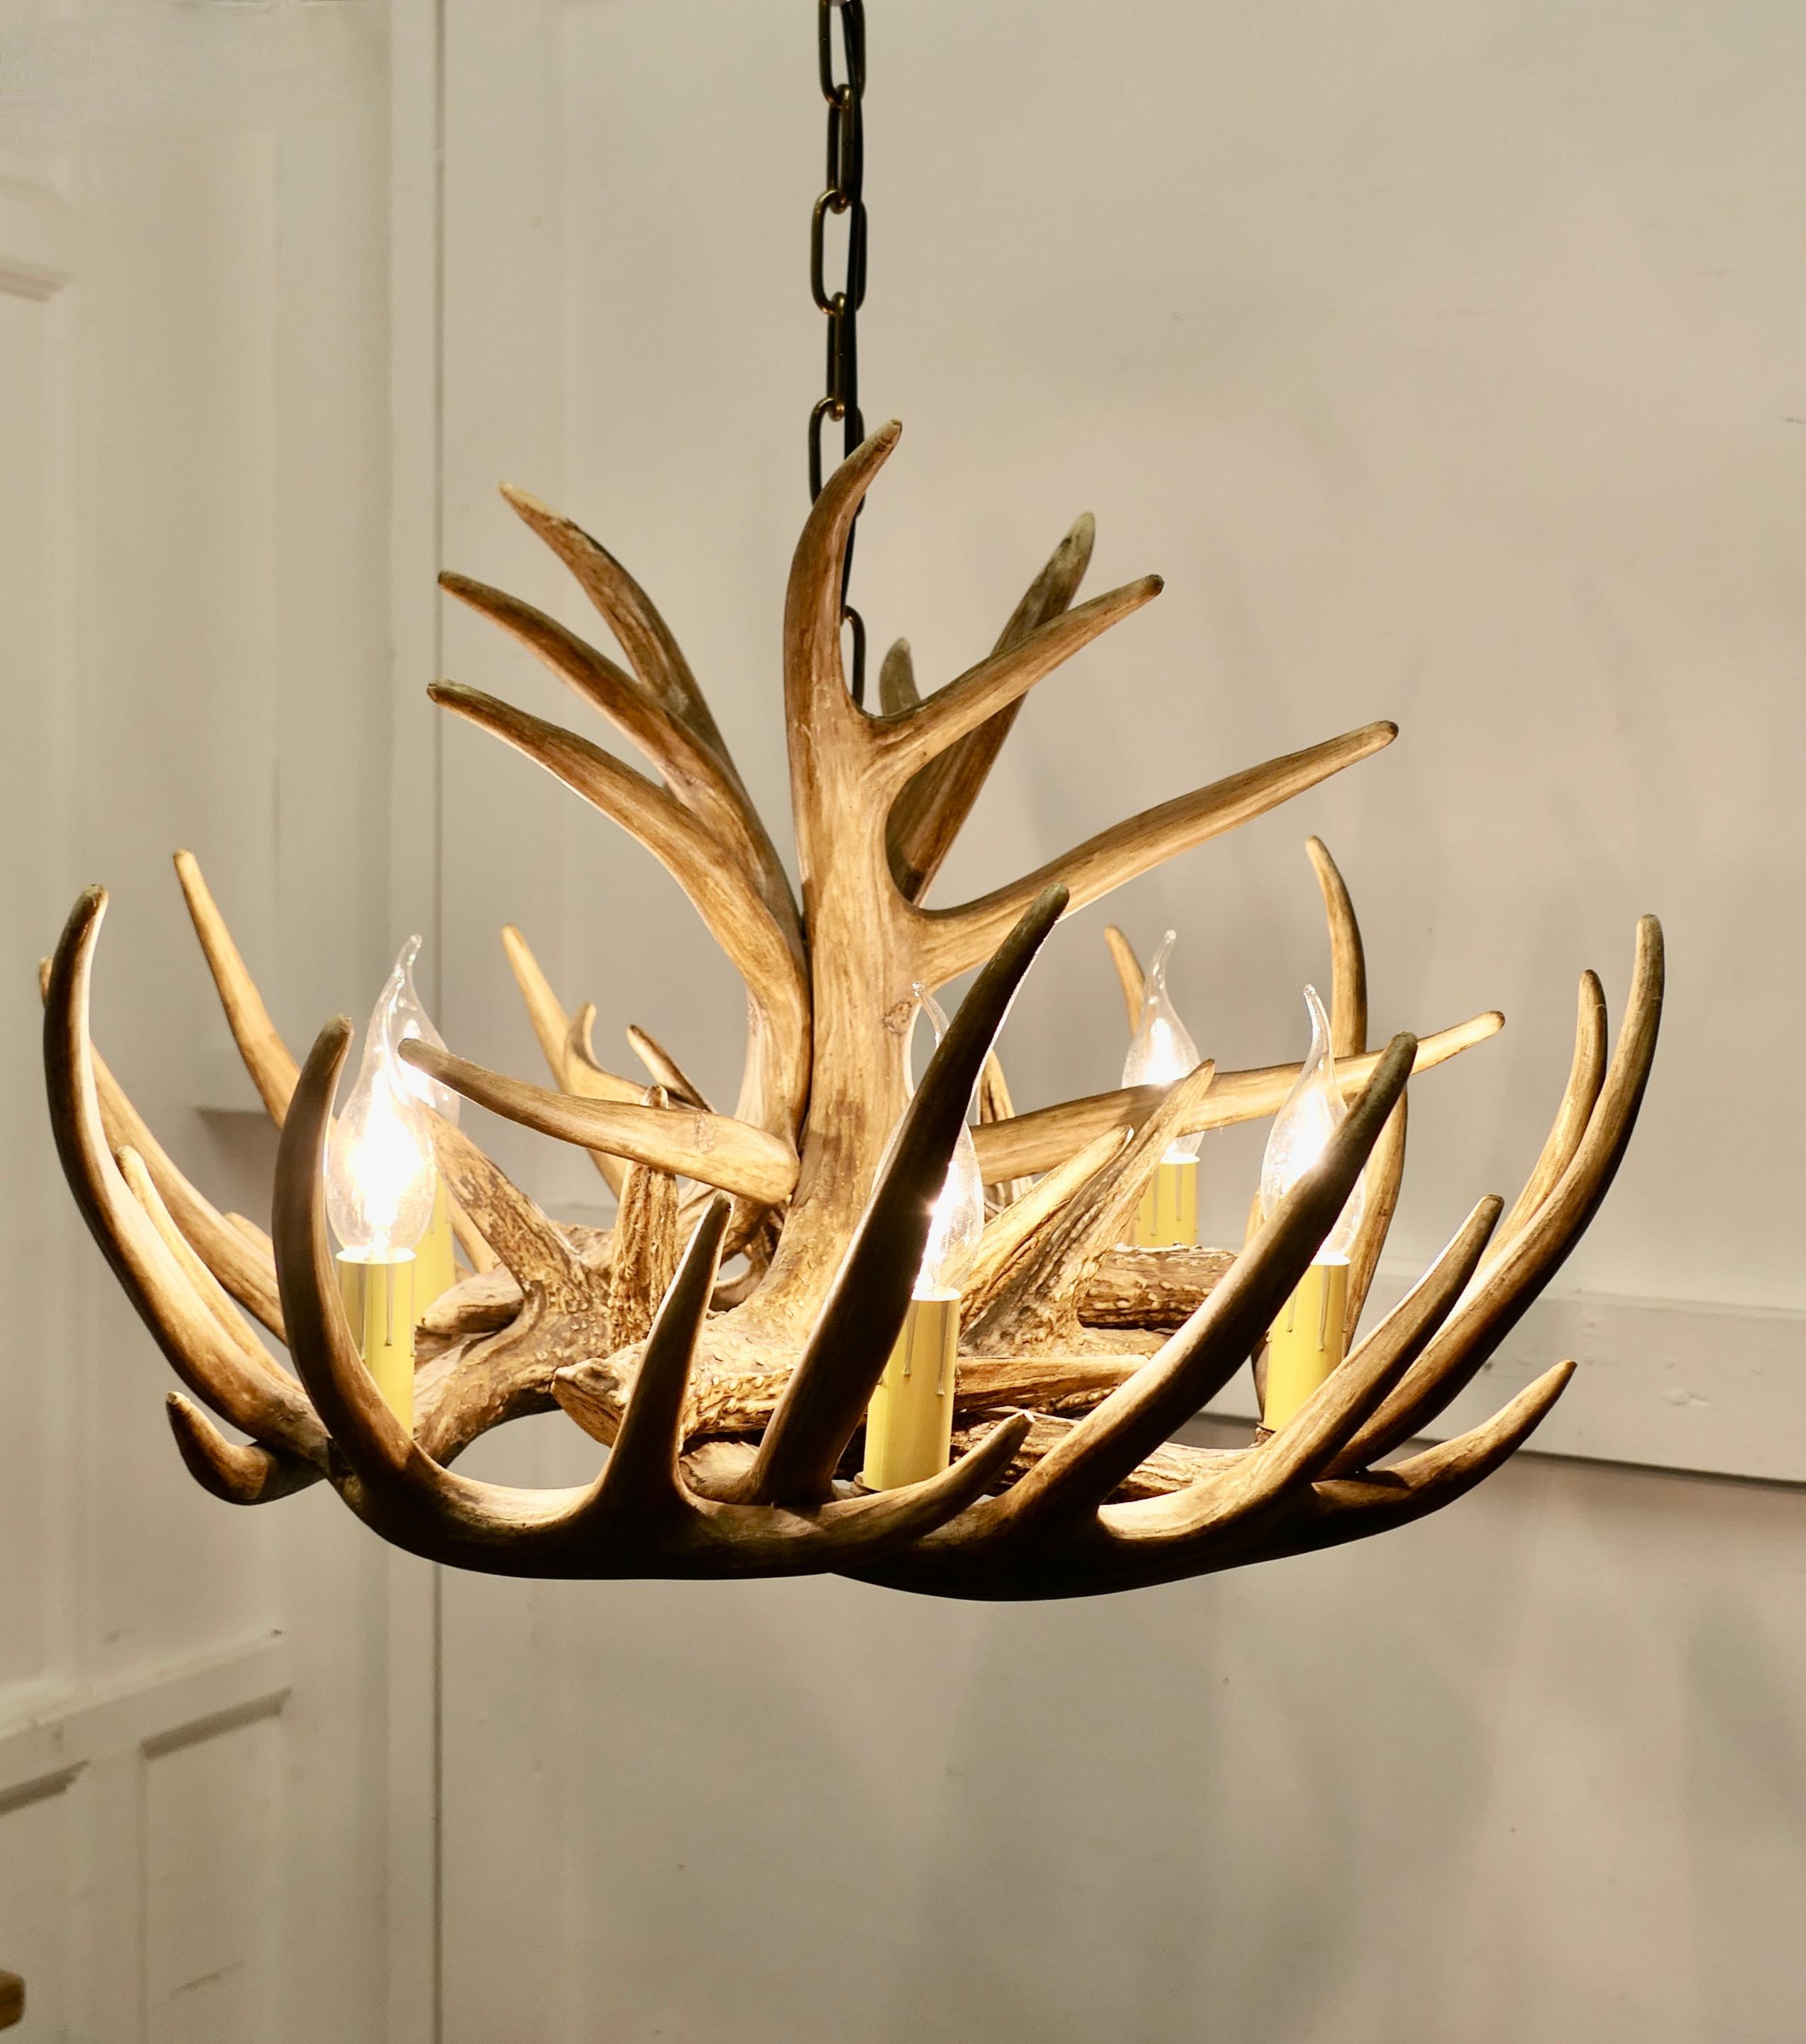 Large Simulated Black Forrest Stag Antler Hanging Chandelier
 
This is a very realistic looking piece, this chandelier design was first made in the 19th Century, and was a great favourite in Scottish hunting lodges
The chandelier has 6 lamps and is